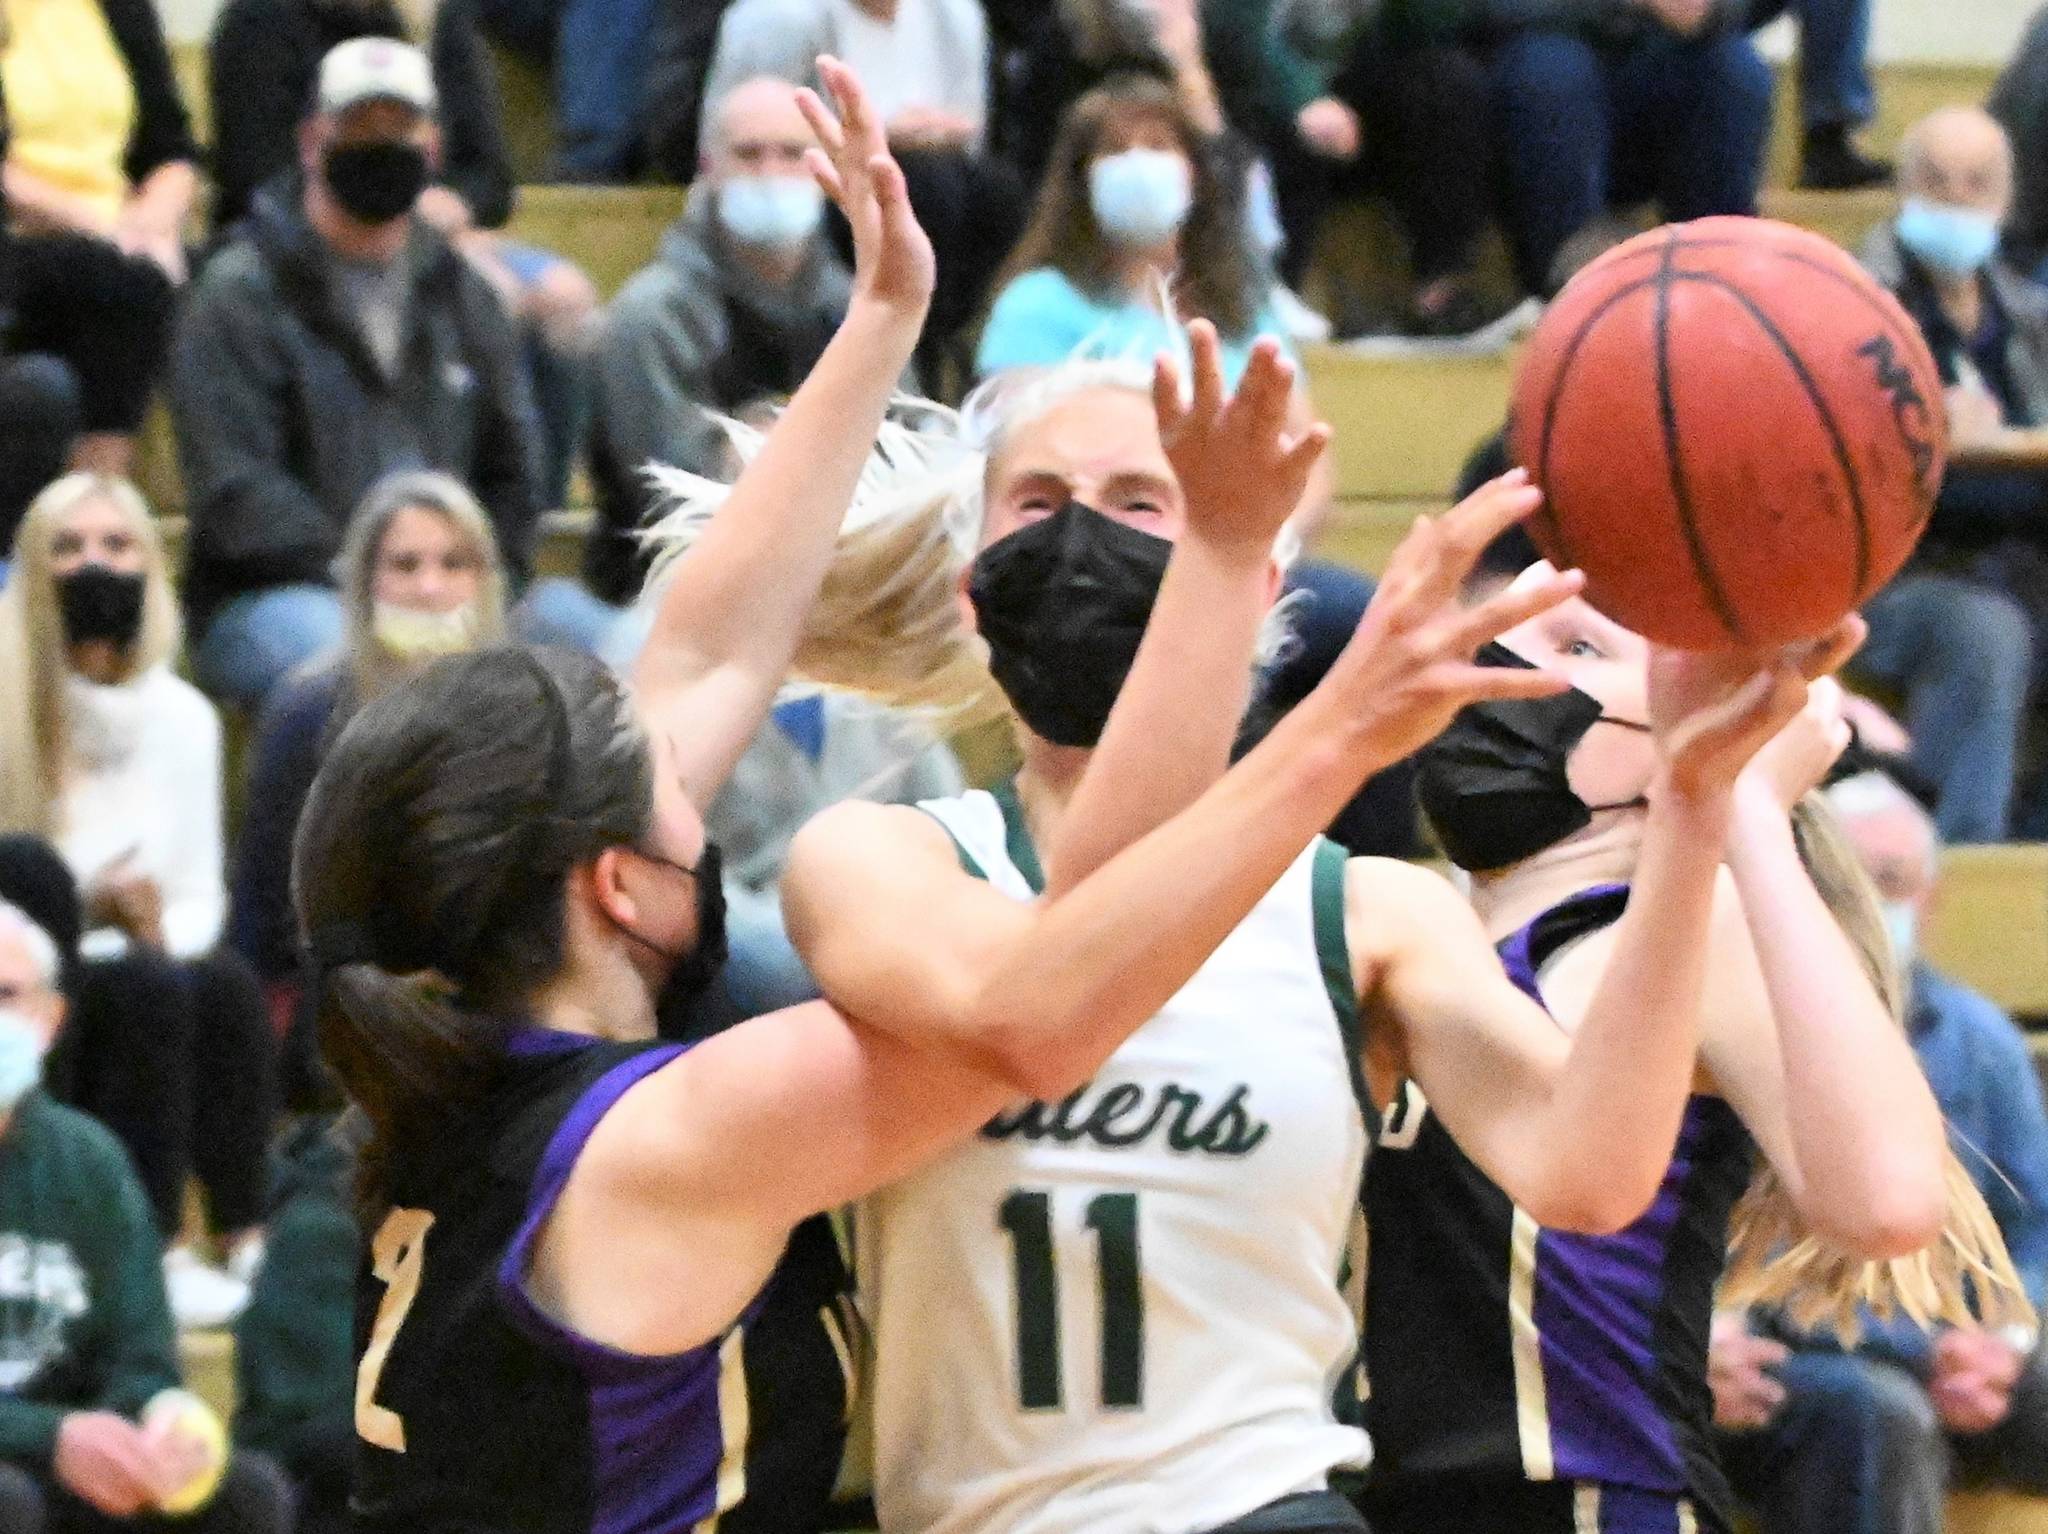 Michael Dashiell/Olympic Peninsula News Group
Port Angeles' Millie Long is defended by Sequim's Hannah Bates (2) and Jolene Vaara. Port Angeles won 68-52 to win the Olympic League Tournament and finish a perfect season at 15-0.